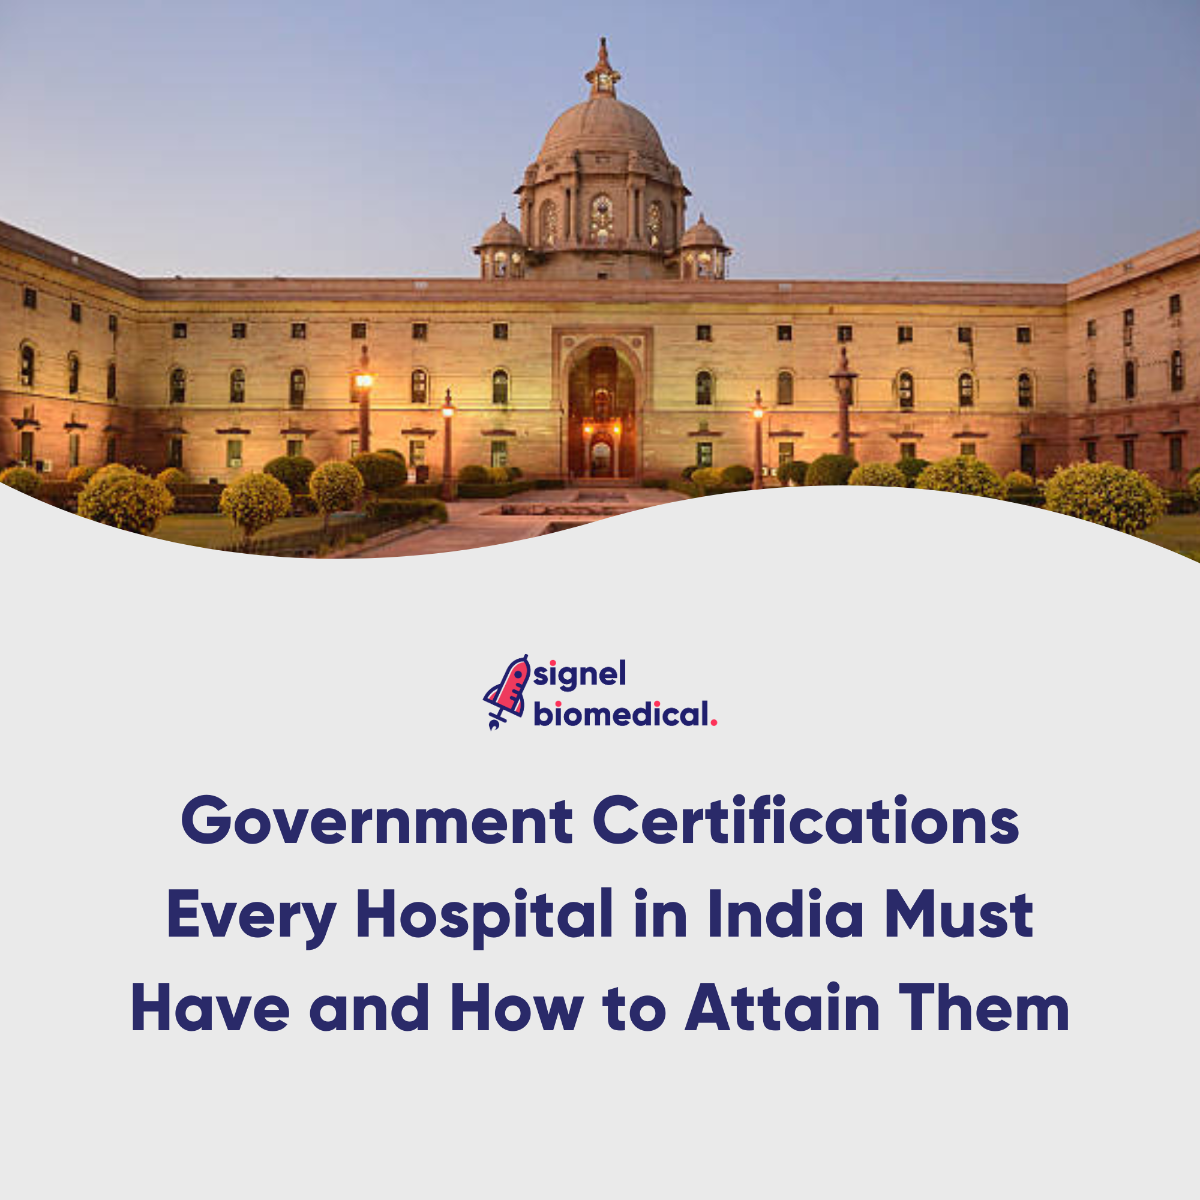 Government Certifications Every